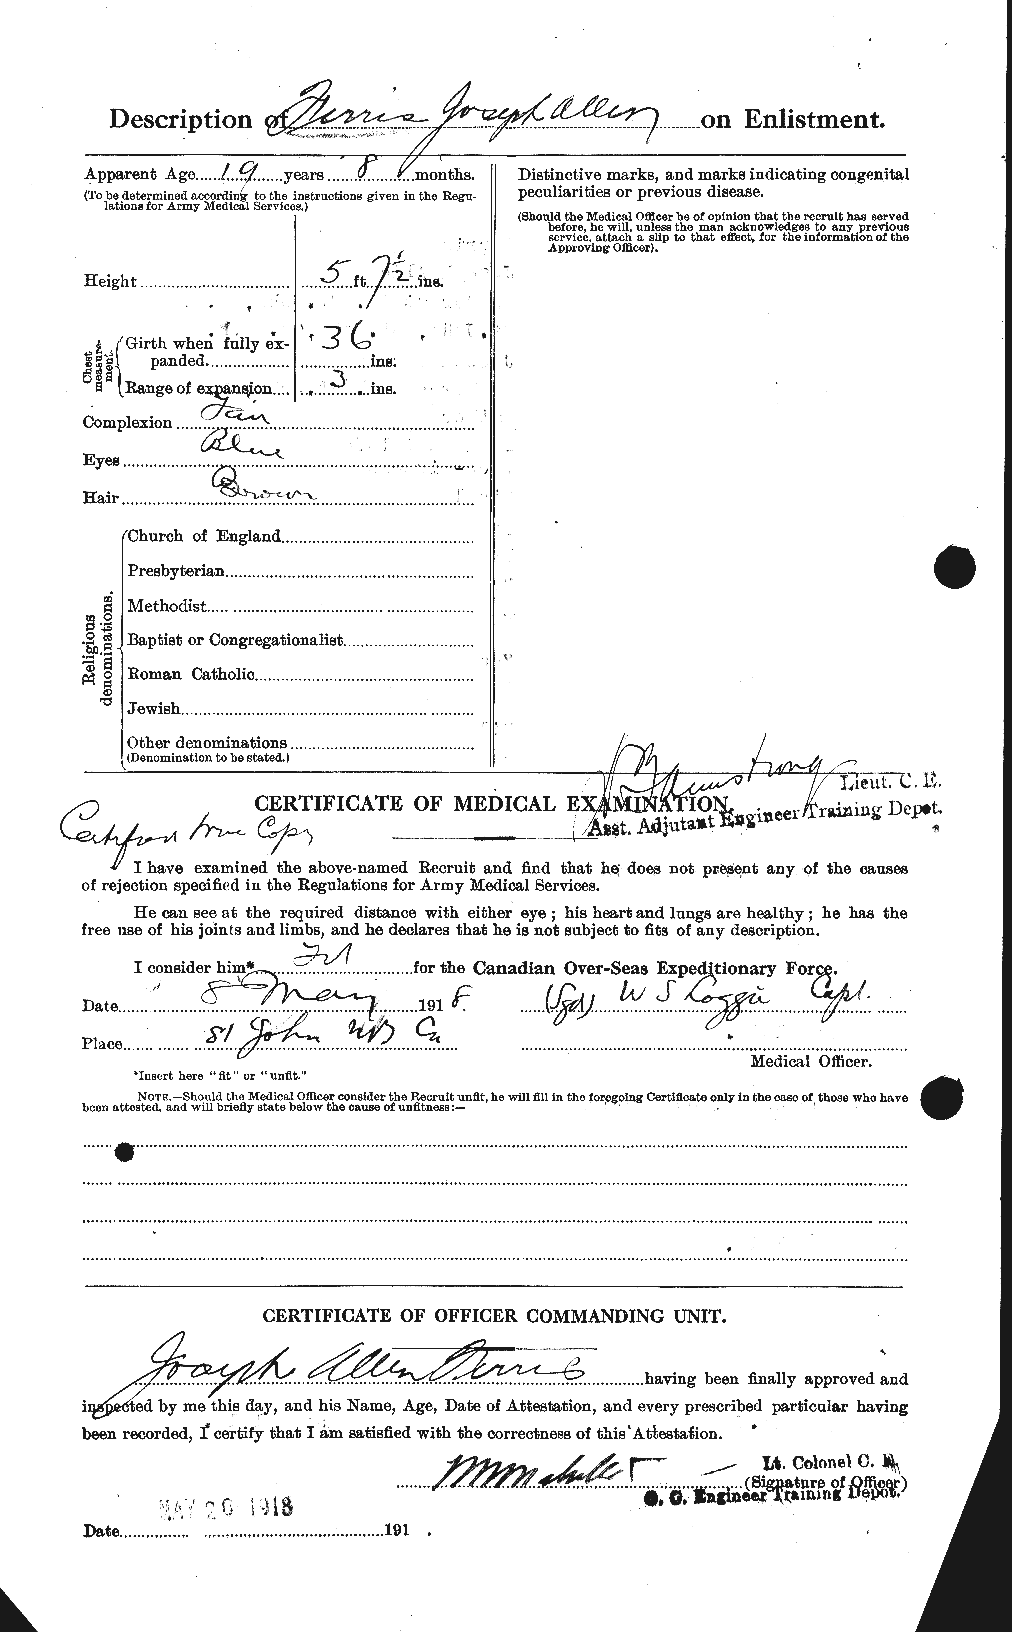 Personnel Records of the First World War - CEF 325221b